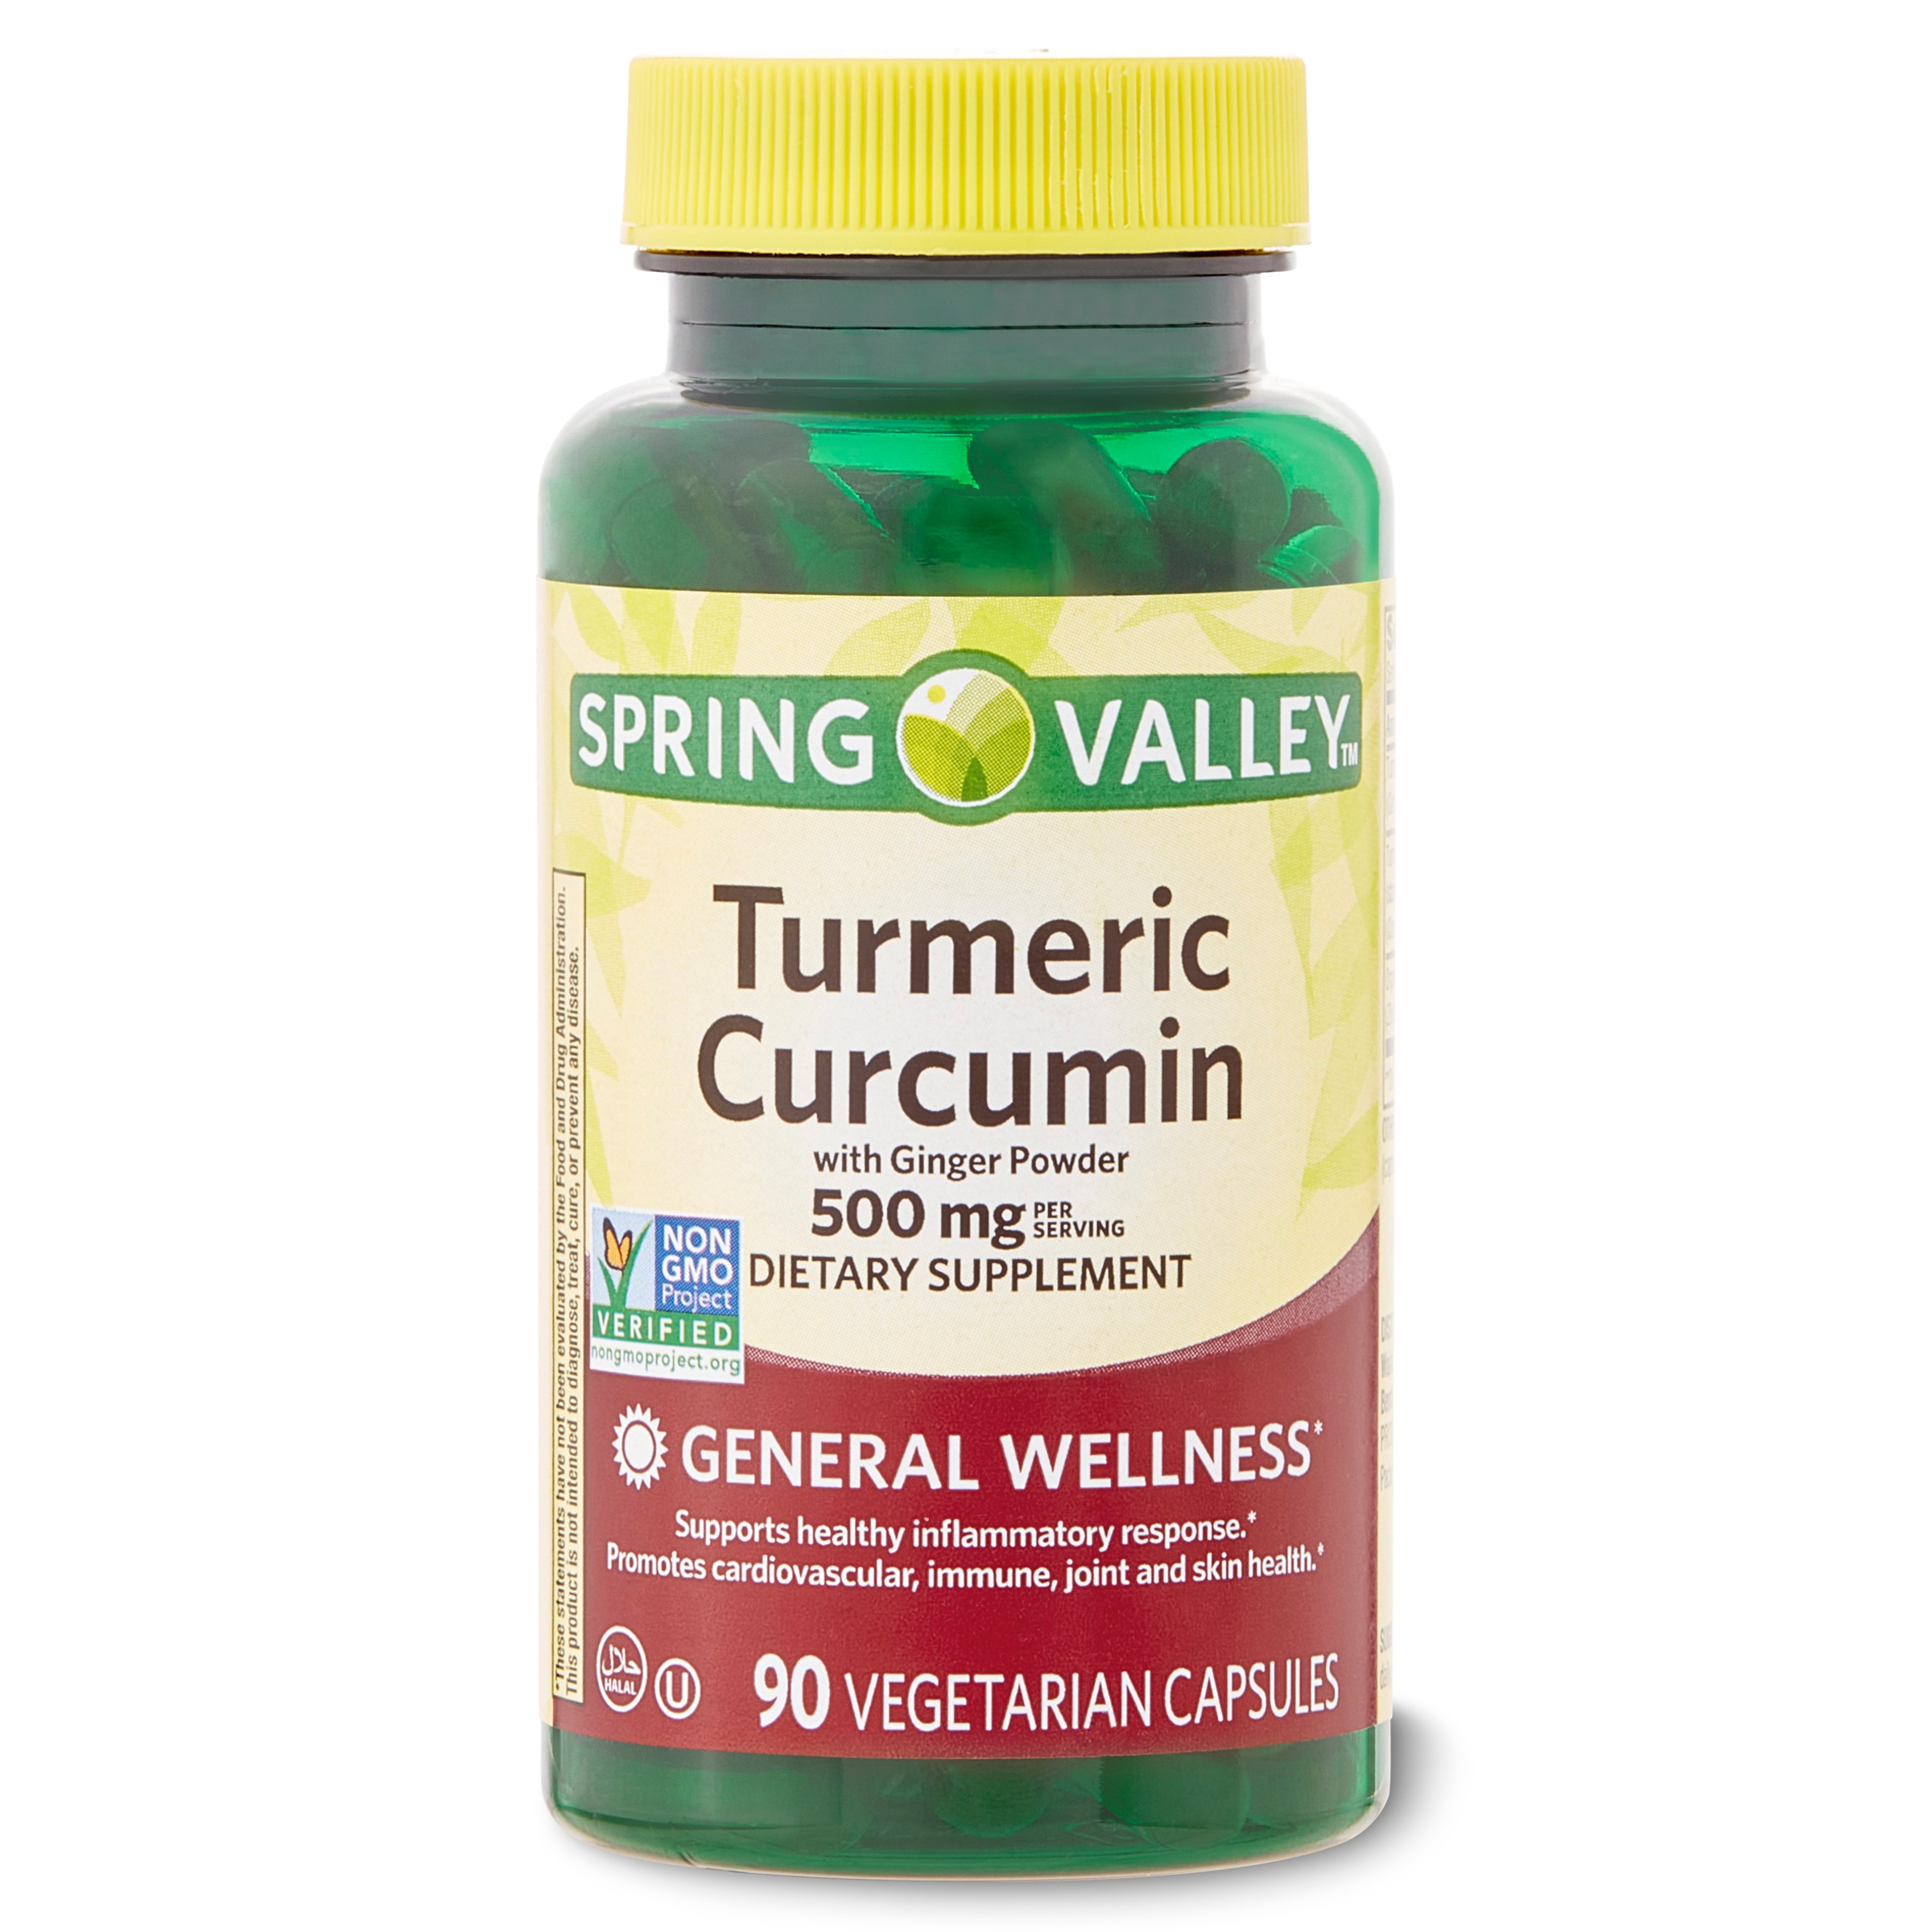 Spring Valley Turmeric Curcumin with Ginger Powder General Wellness Dietary Supplement Vegetarian Capsules, 500 mg, 90 Count - image 1 of 9